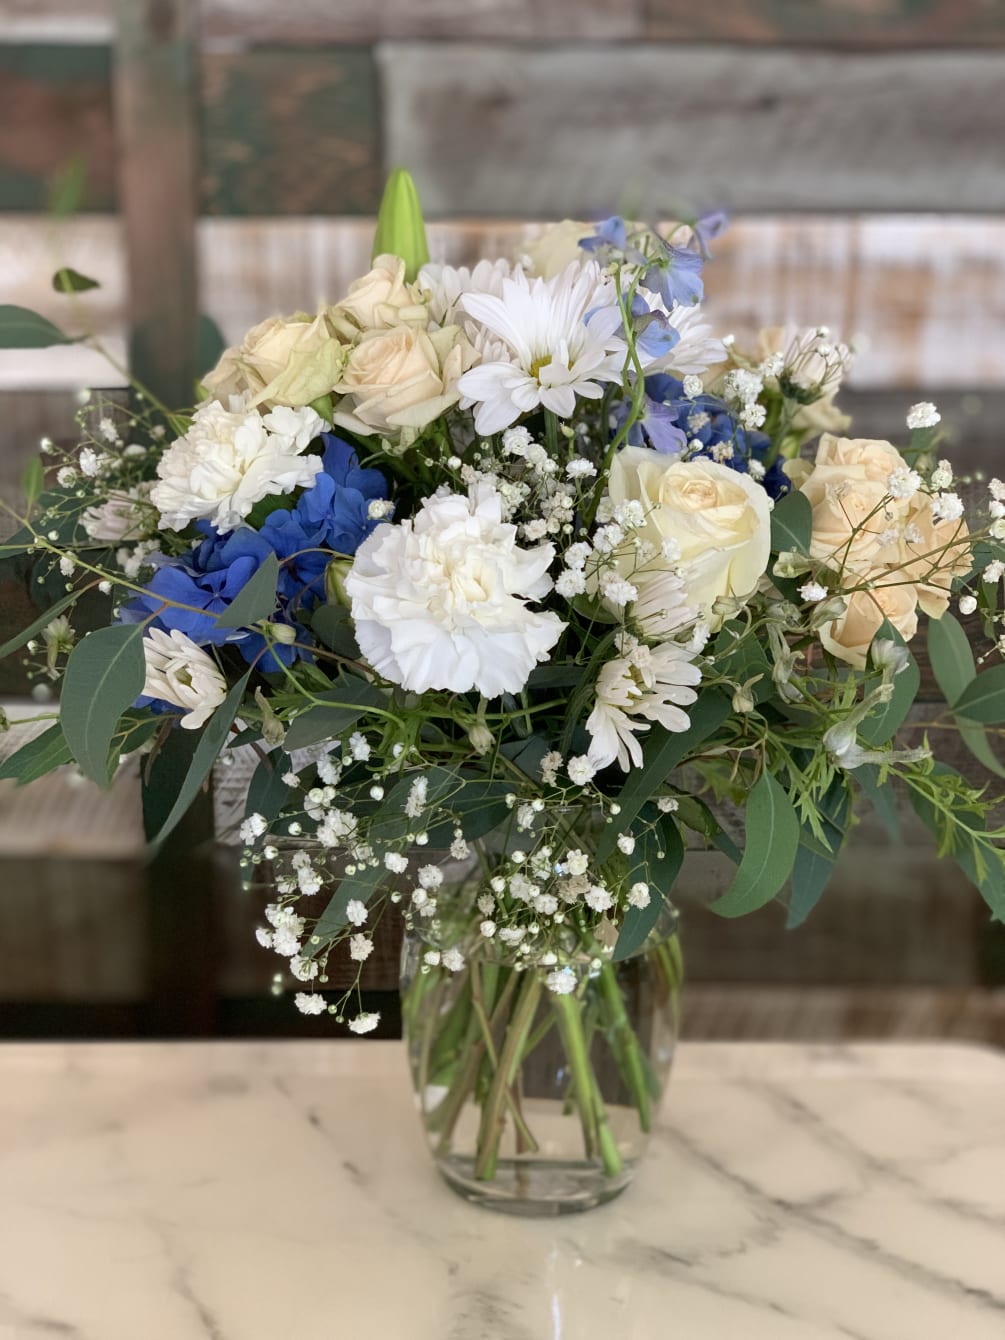 An arrangement that reflects the serenity of blue and white. Our arrangement